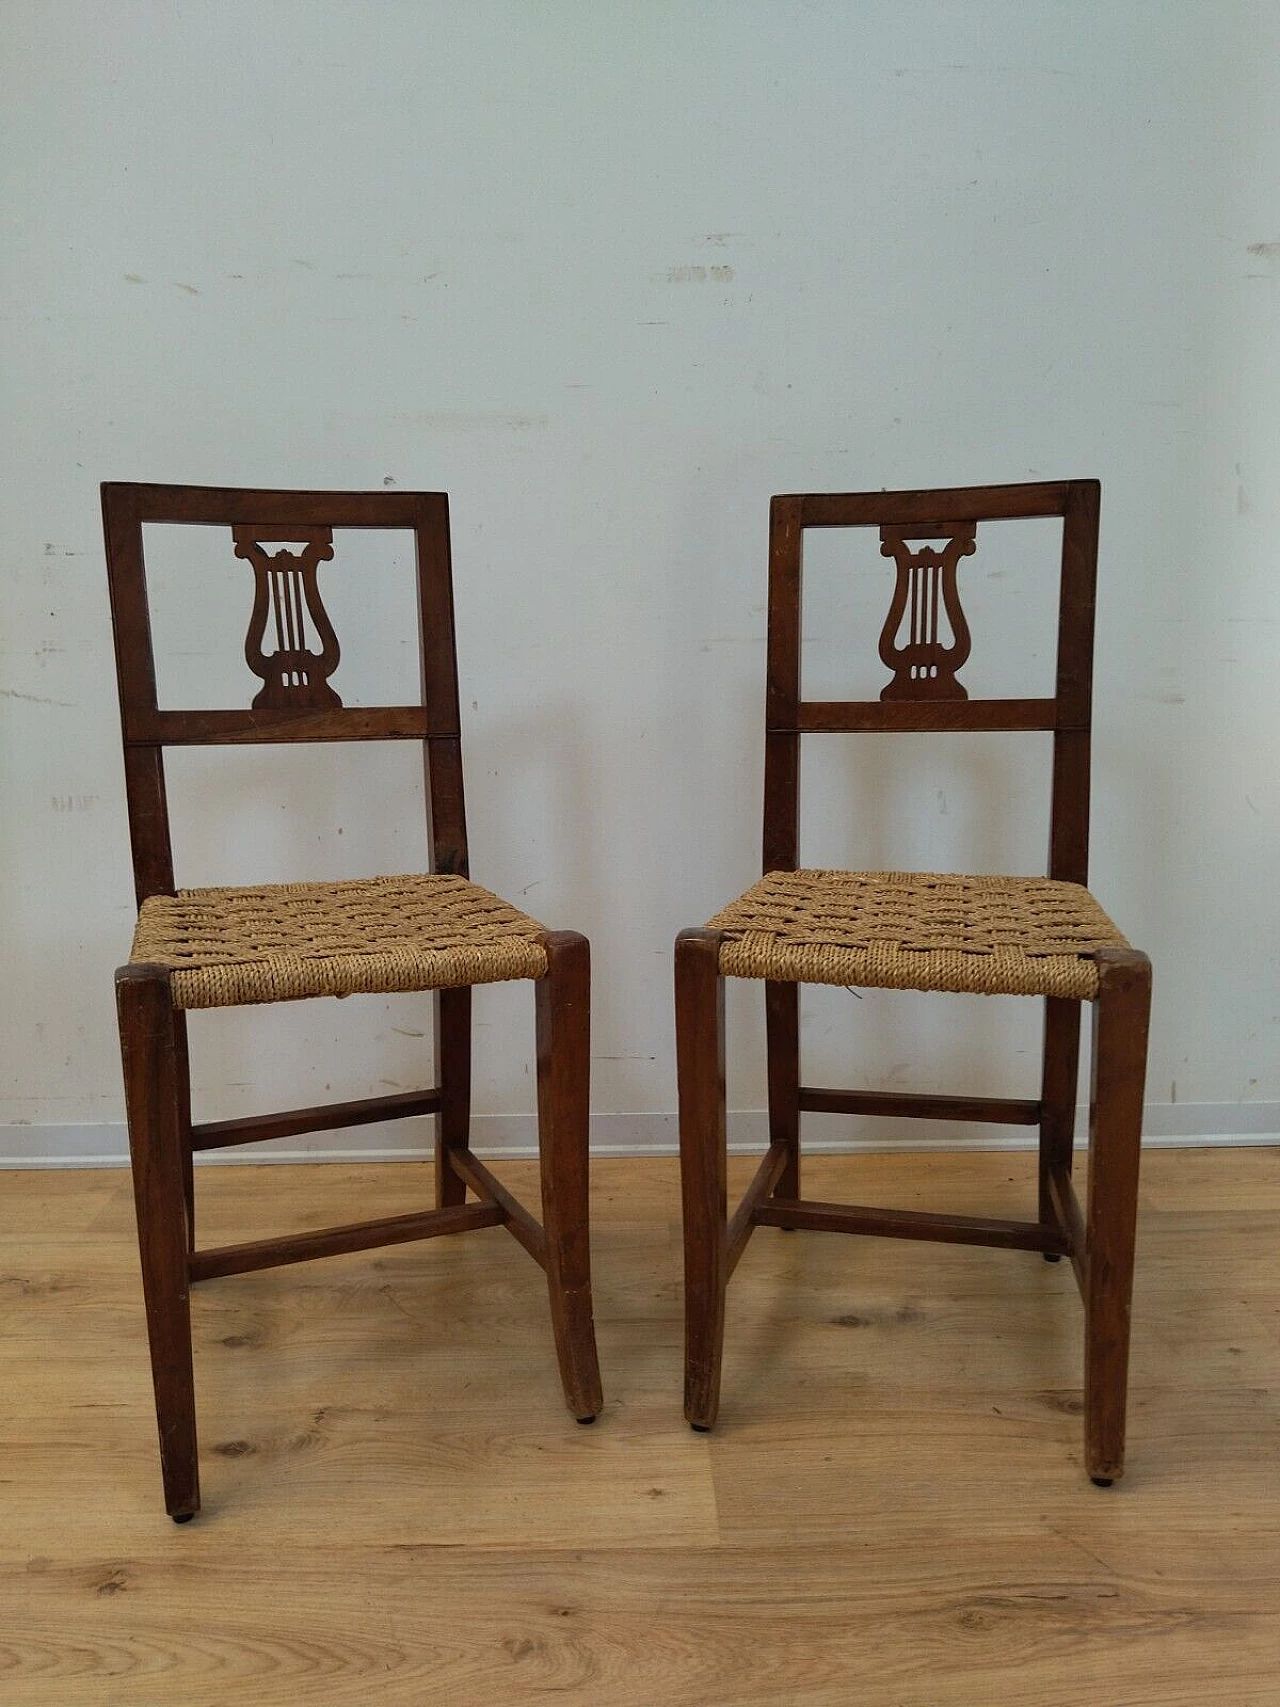 Pair of Empire solid walnut and straw chairs, early 19th century 10